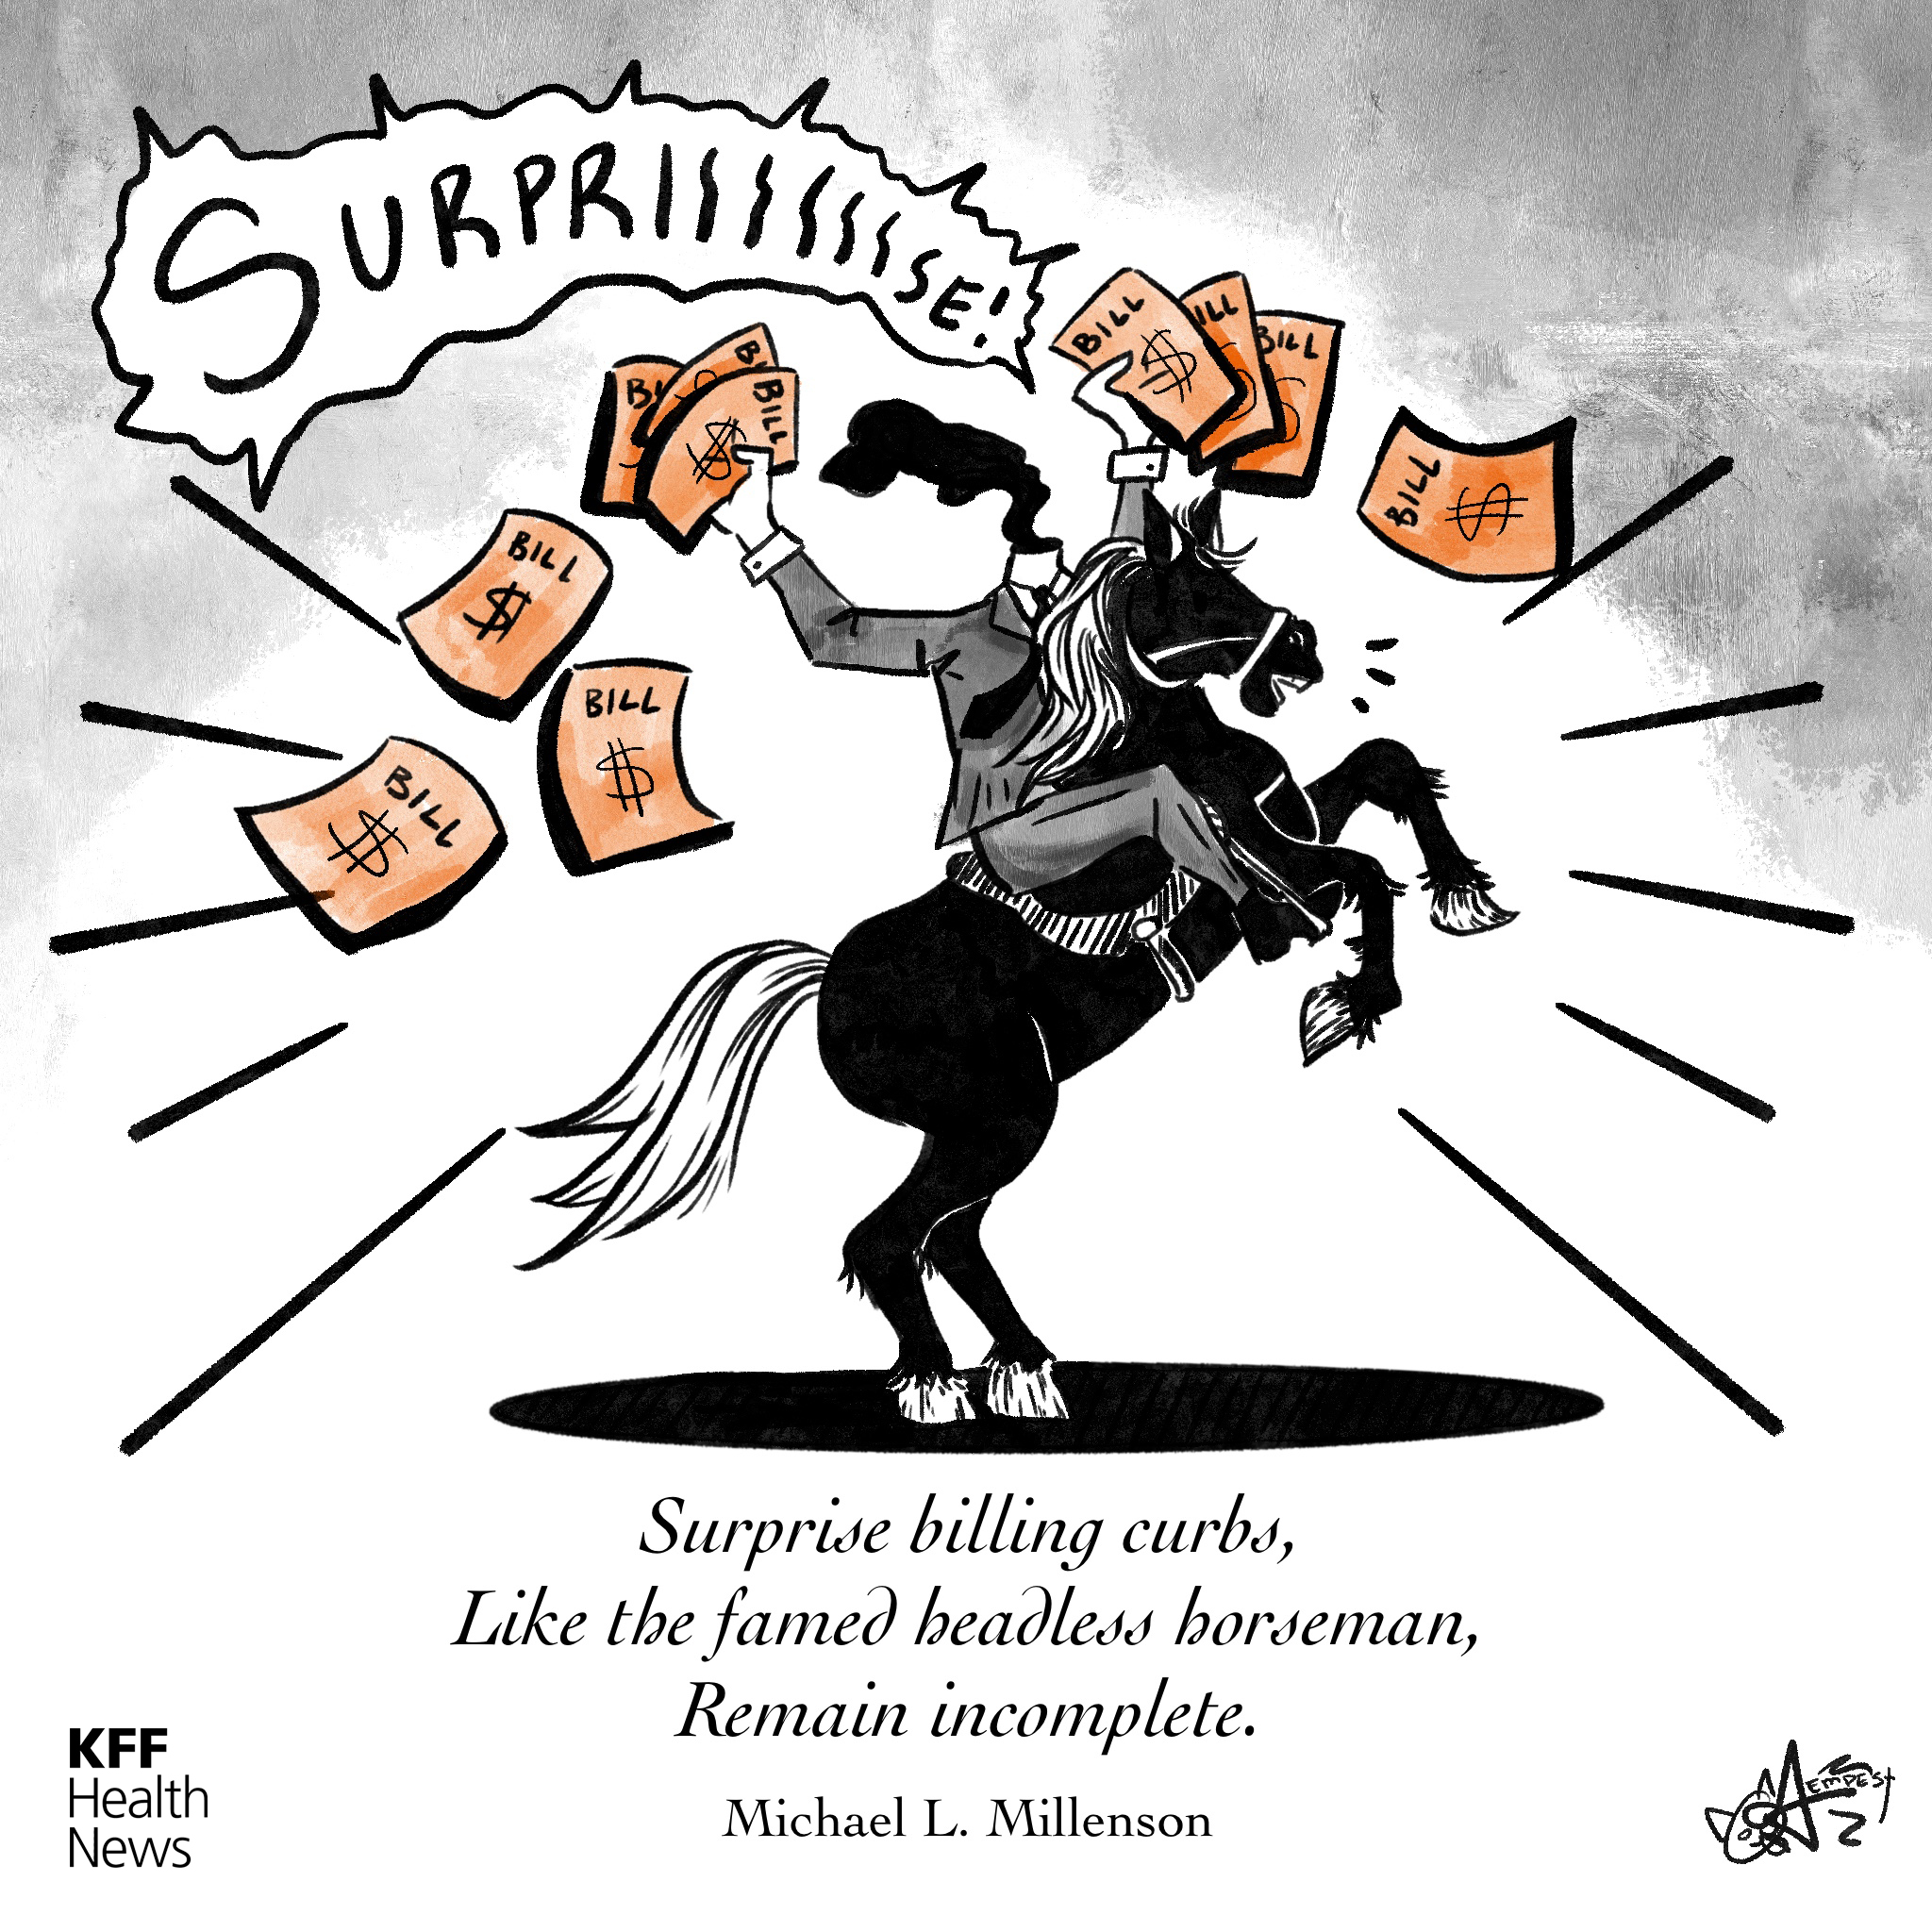 A black and white cartoon drawing shoes a headless horseman holding surprise medical bills while yelling, "surpriiiiiise!" Below him, a haiku reads: "Surprise billing curbs, / Like the famed headless horseman, / Remain incomplete."